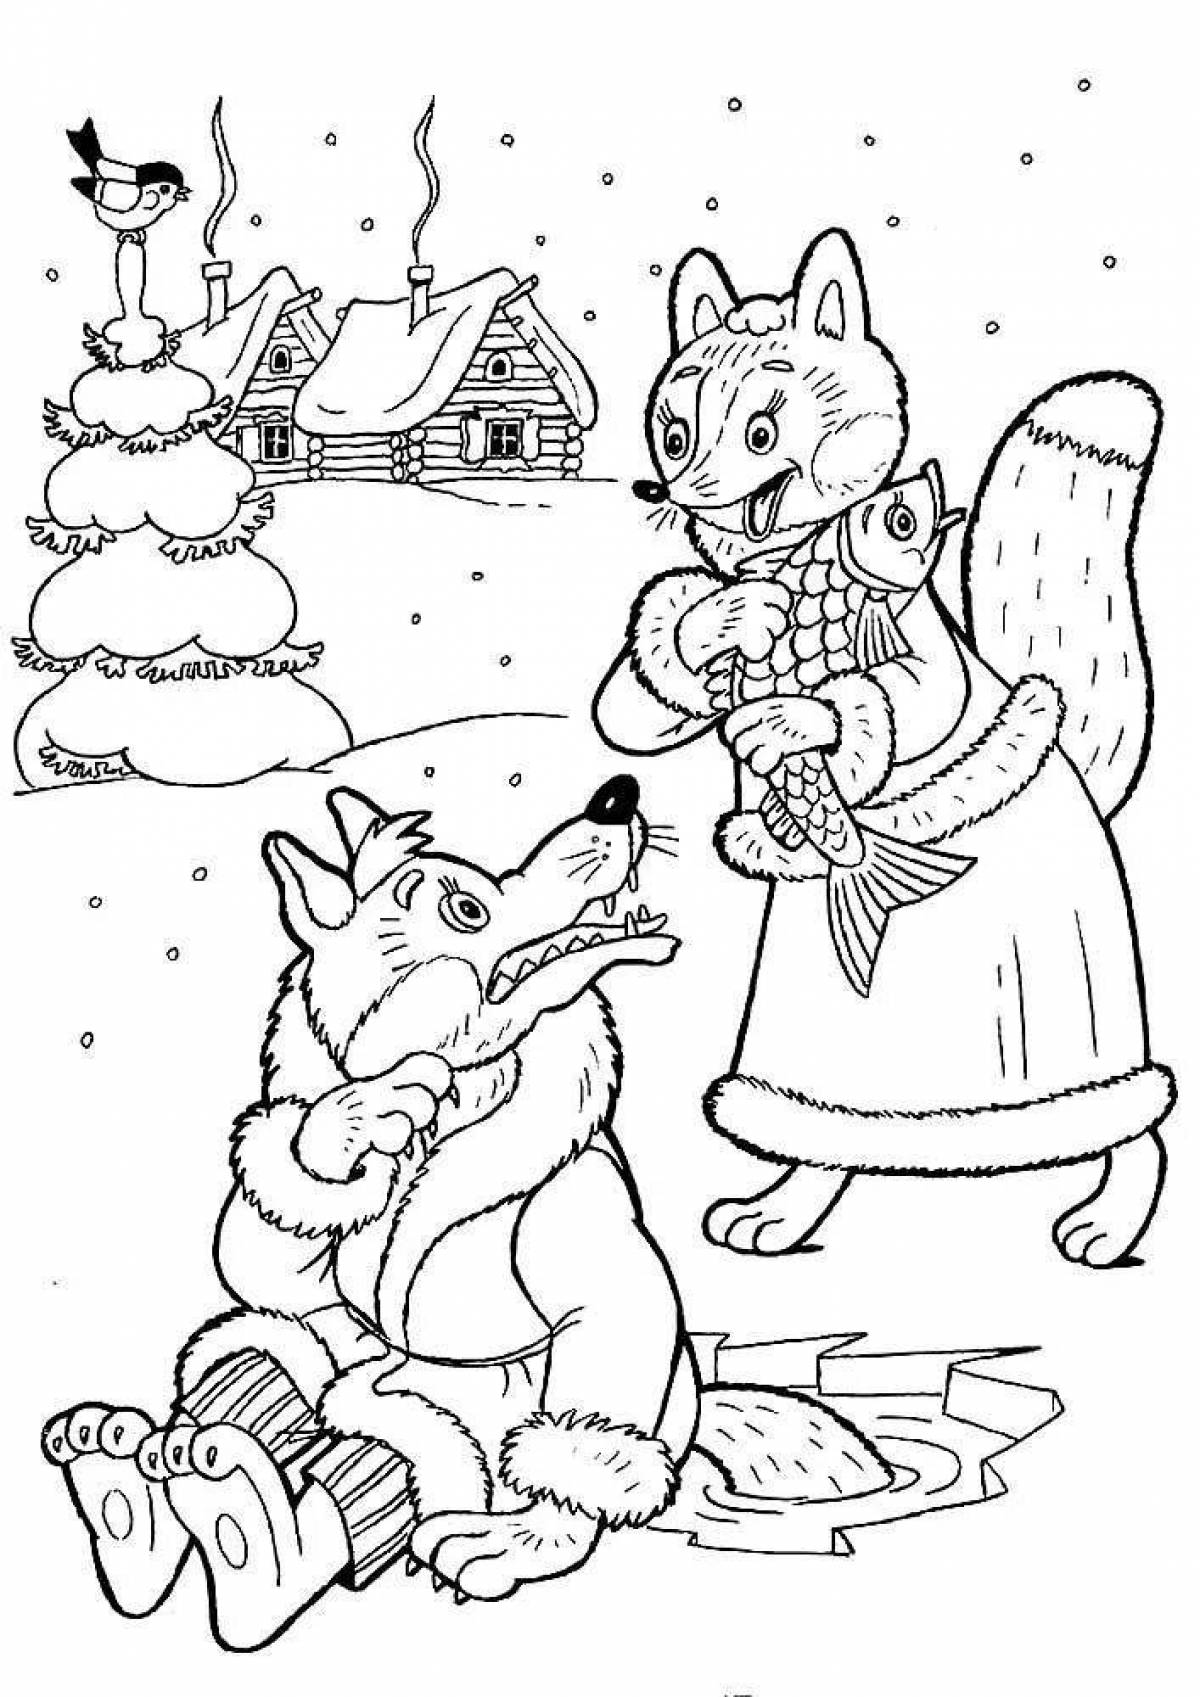 Exquisite fairy tale characters coloring book